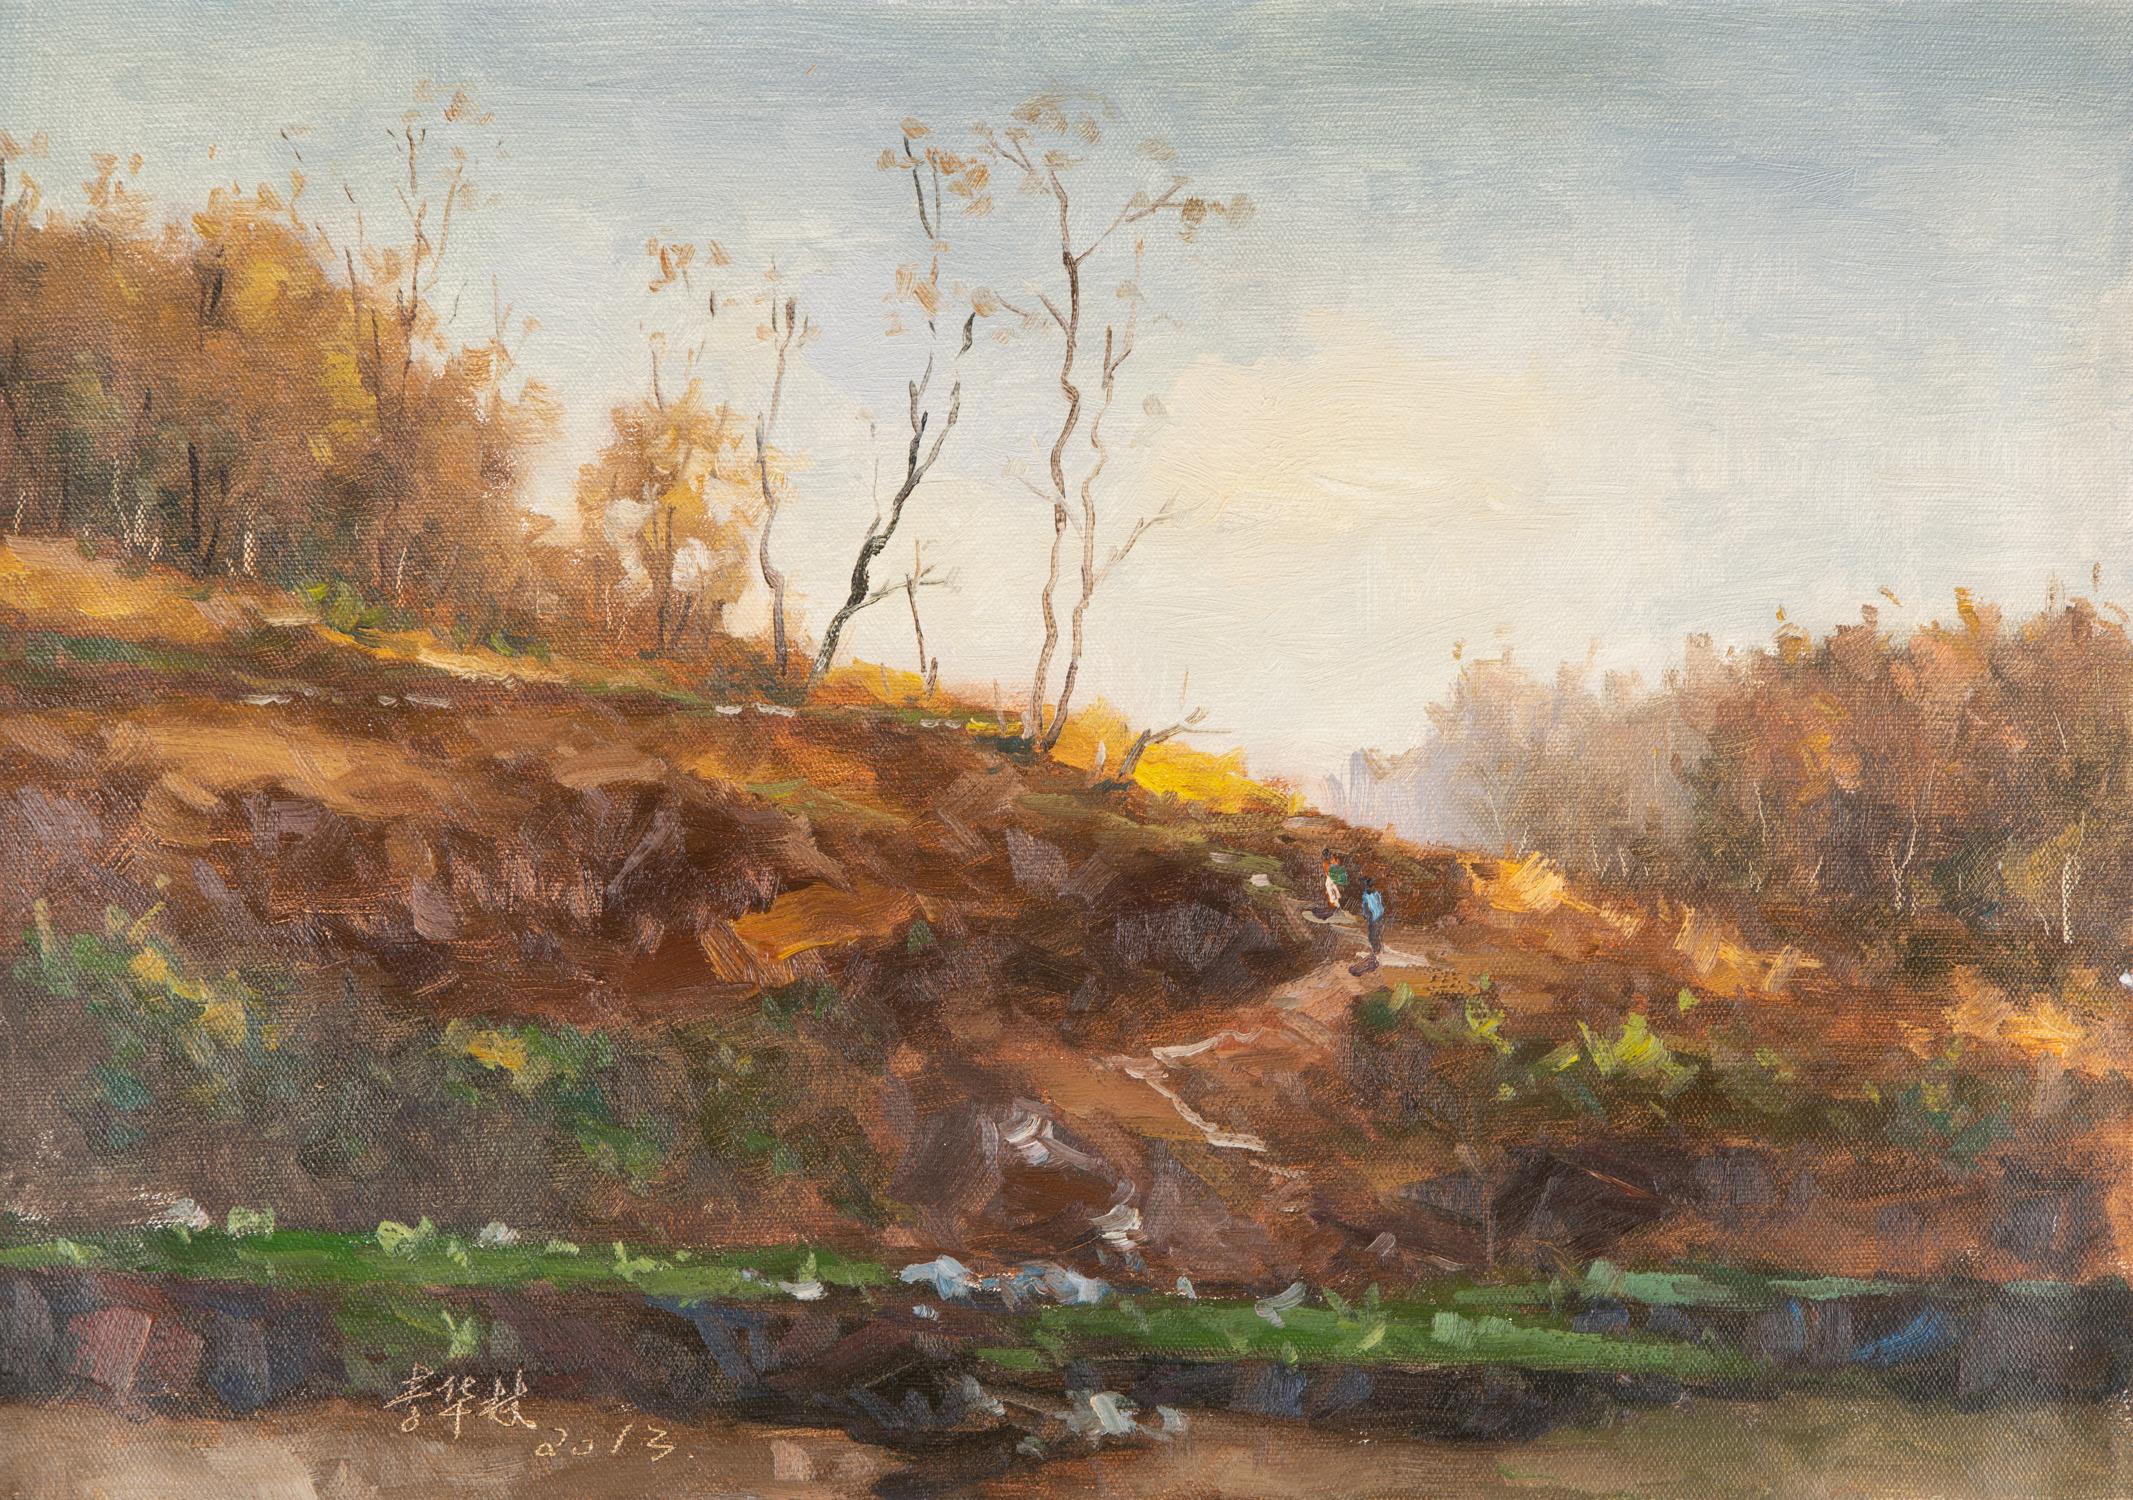 Title: Autumn Countryside 2
 Medium: Oil on canvas
 Size: 19.5 x 27.5 inches
 Frame: Framing options available!
 Condition: The painting appears to be in excellent condition.
 Note: This painting is unstretched
 Year: 2013
 Artist: Hualin Li
